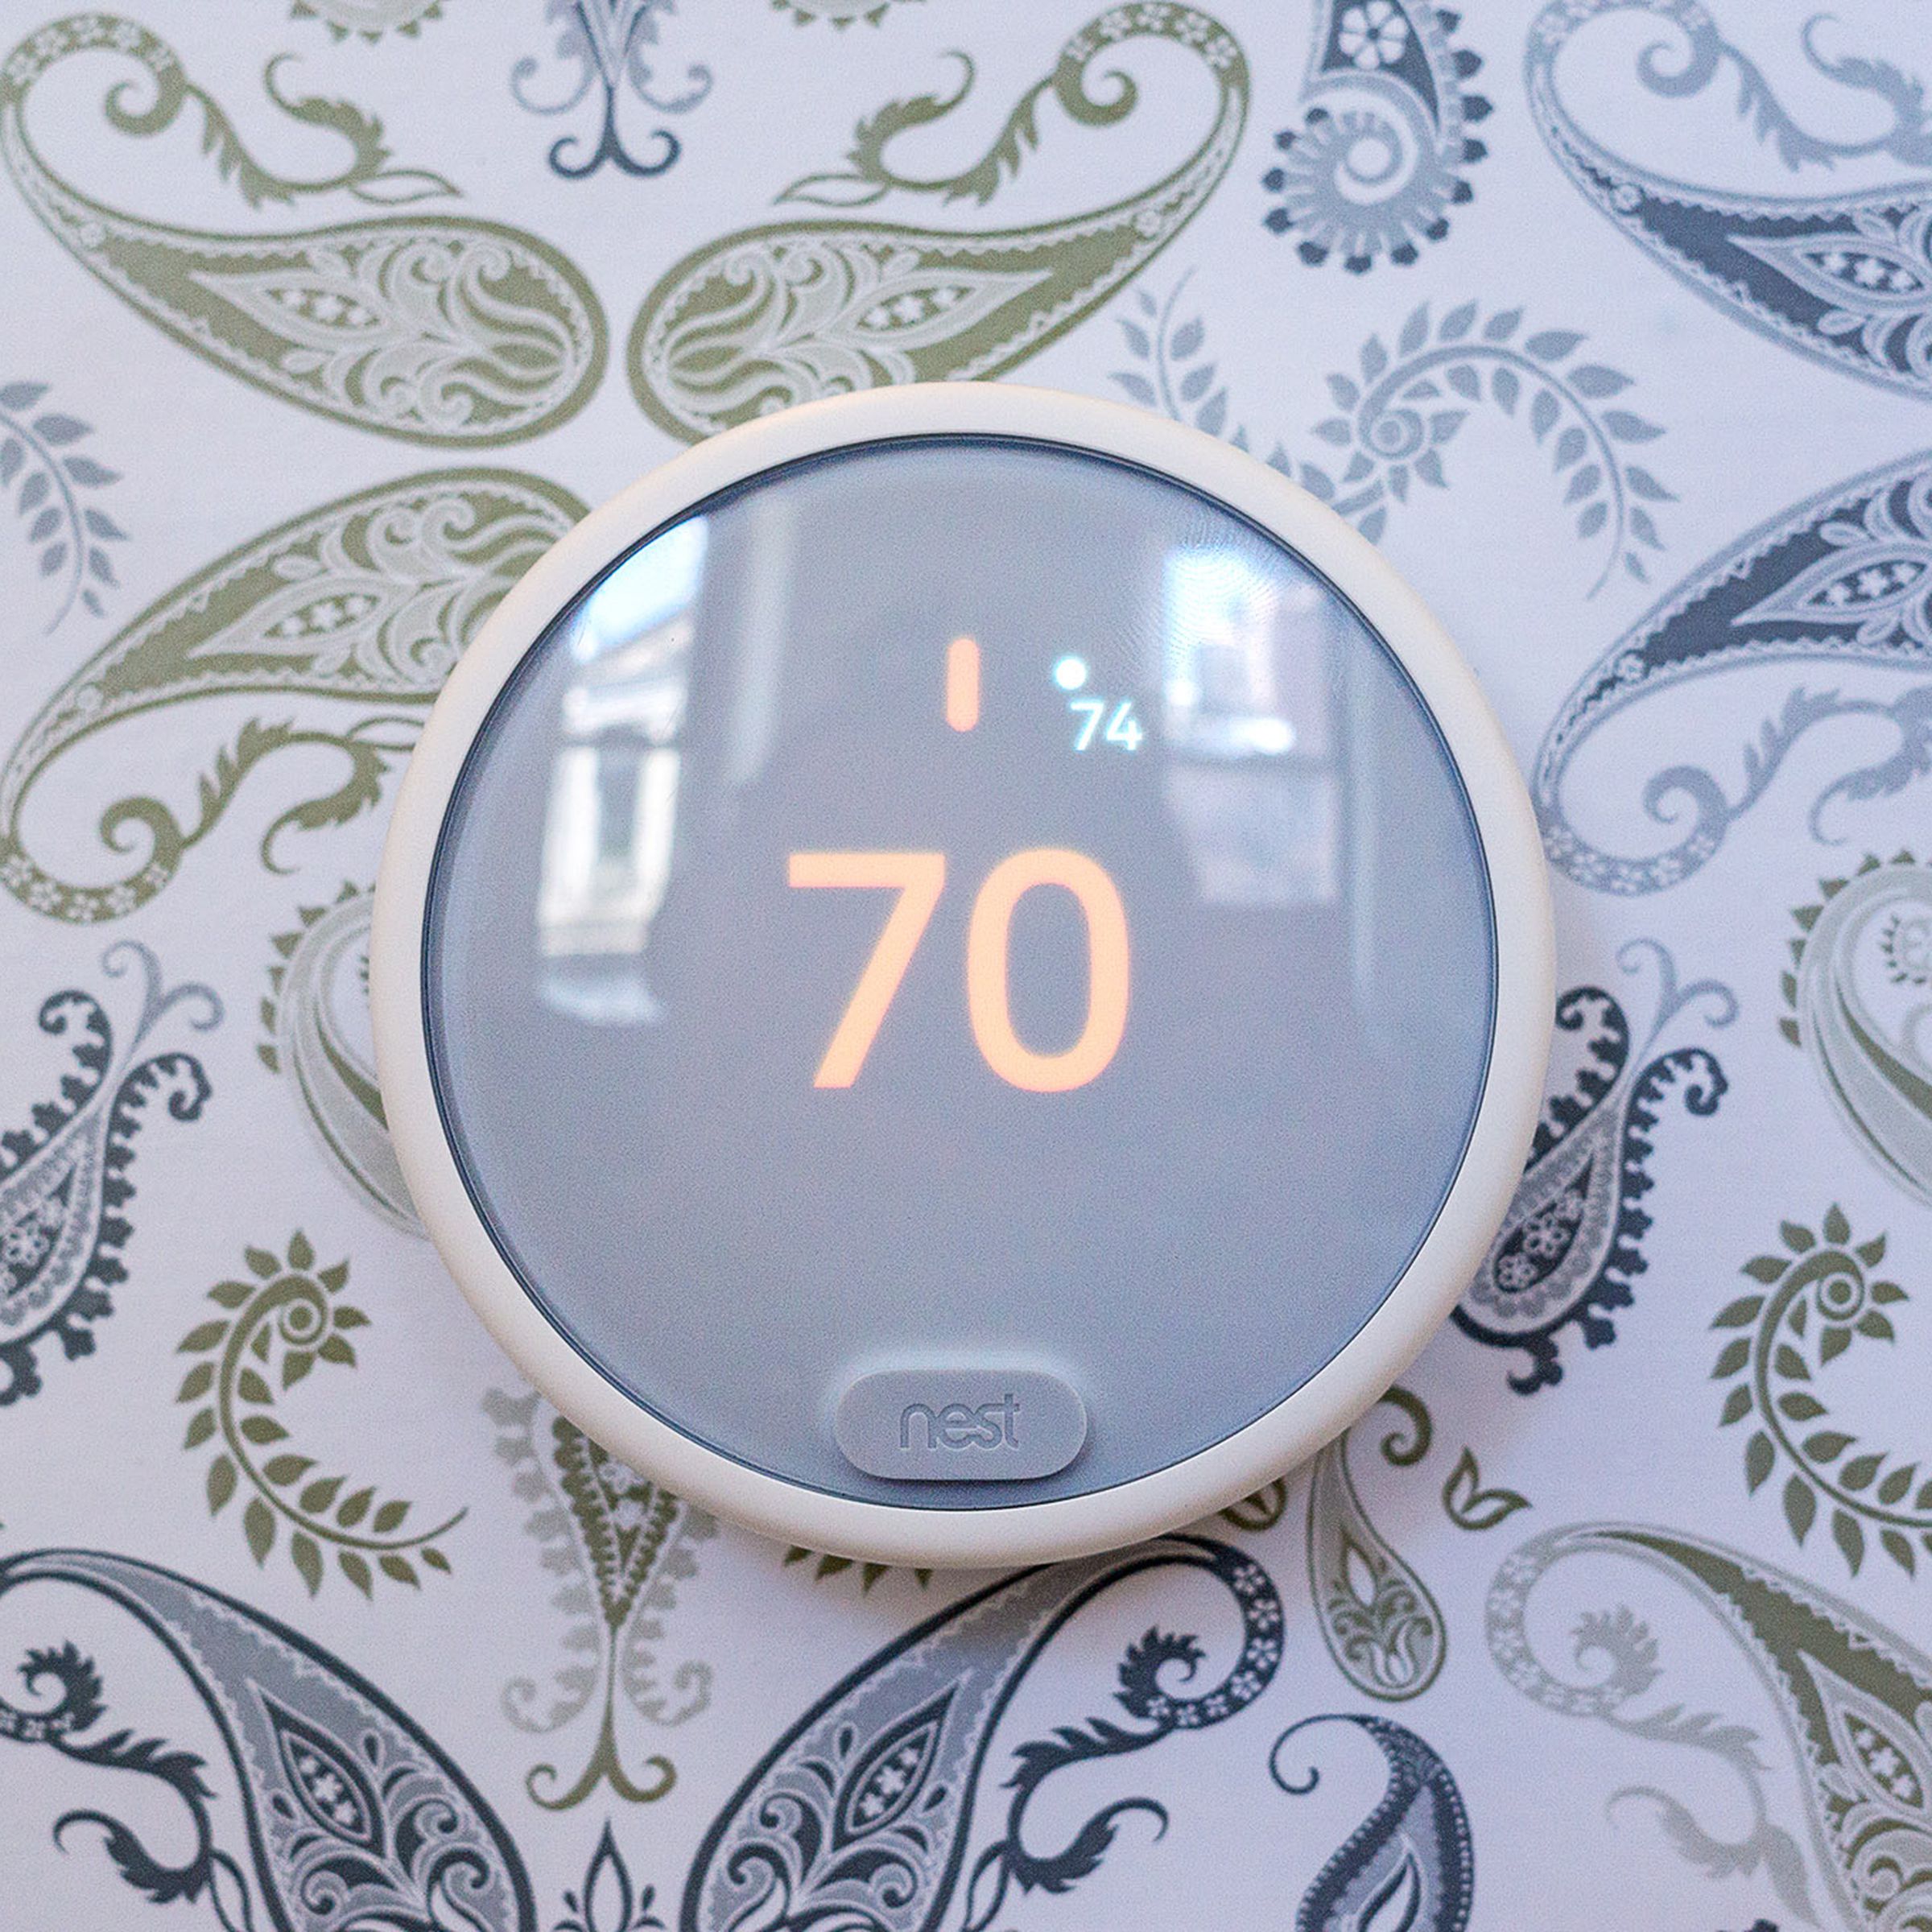 Nest E smart thermostat on wall with paisley wallpaper